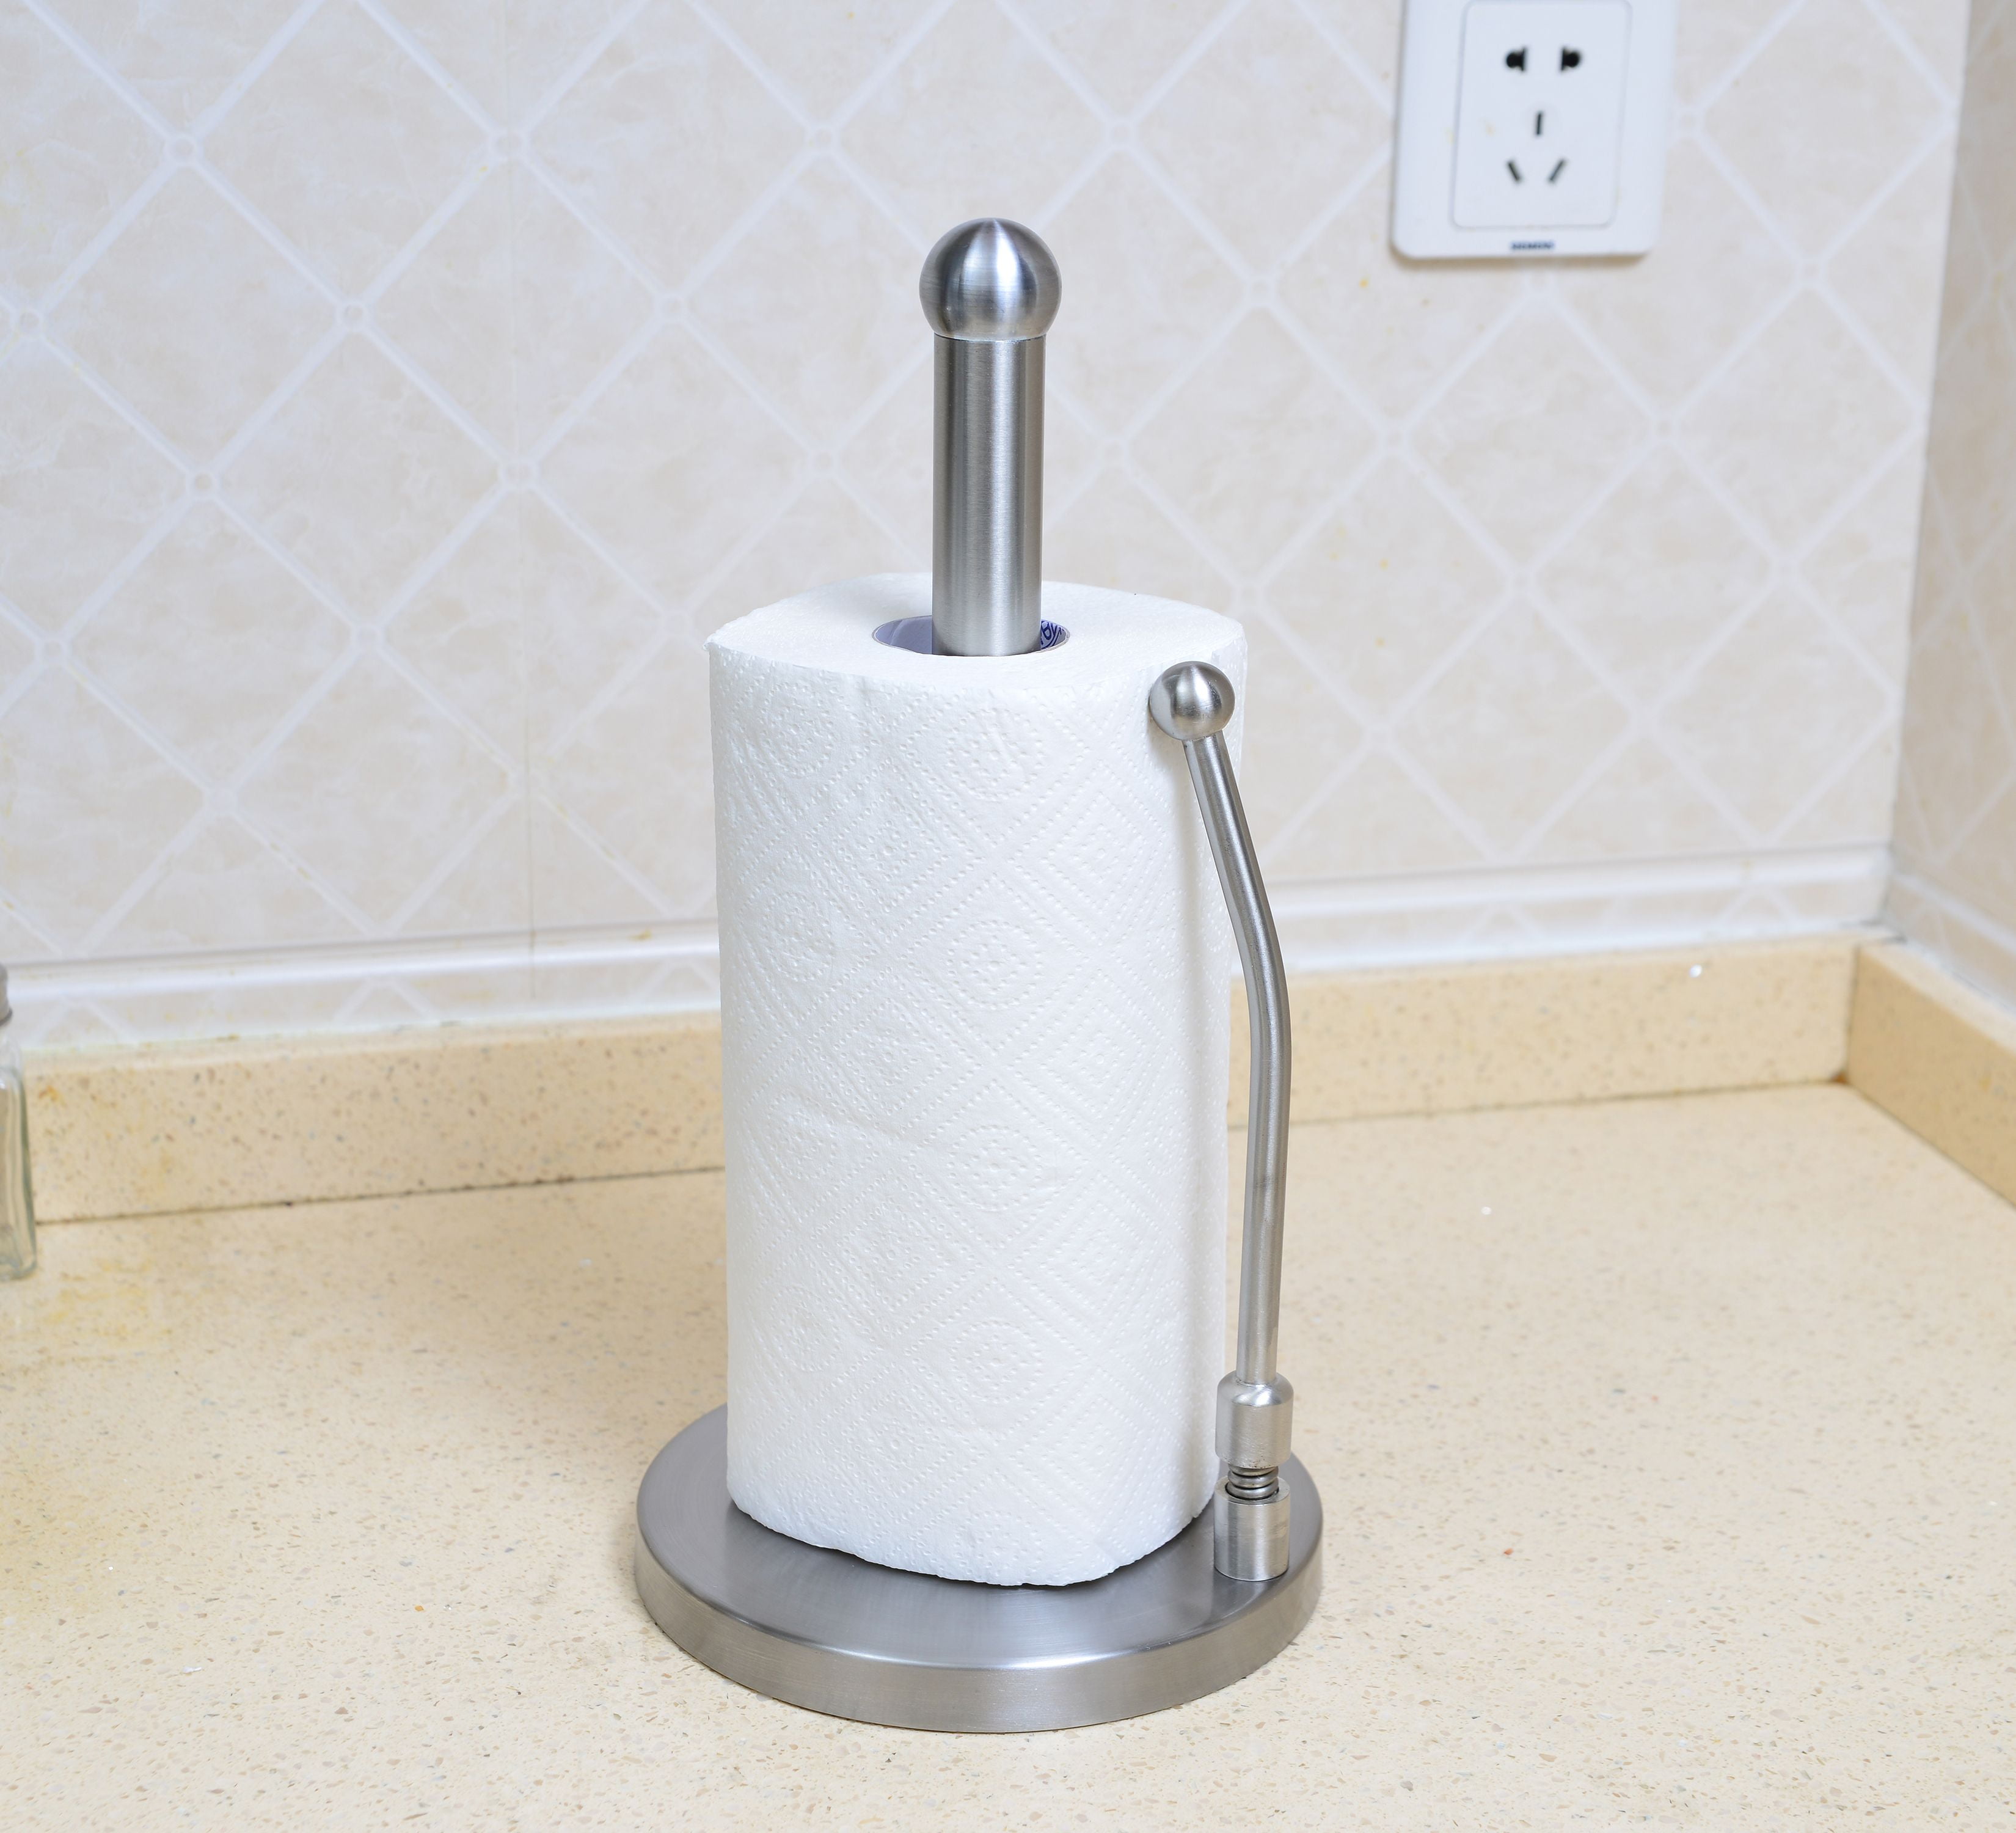 Kitchen Details Paper Towel Holder with weighted base in Stainless